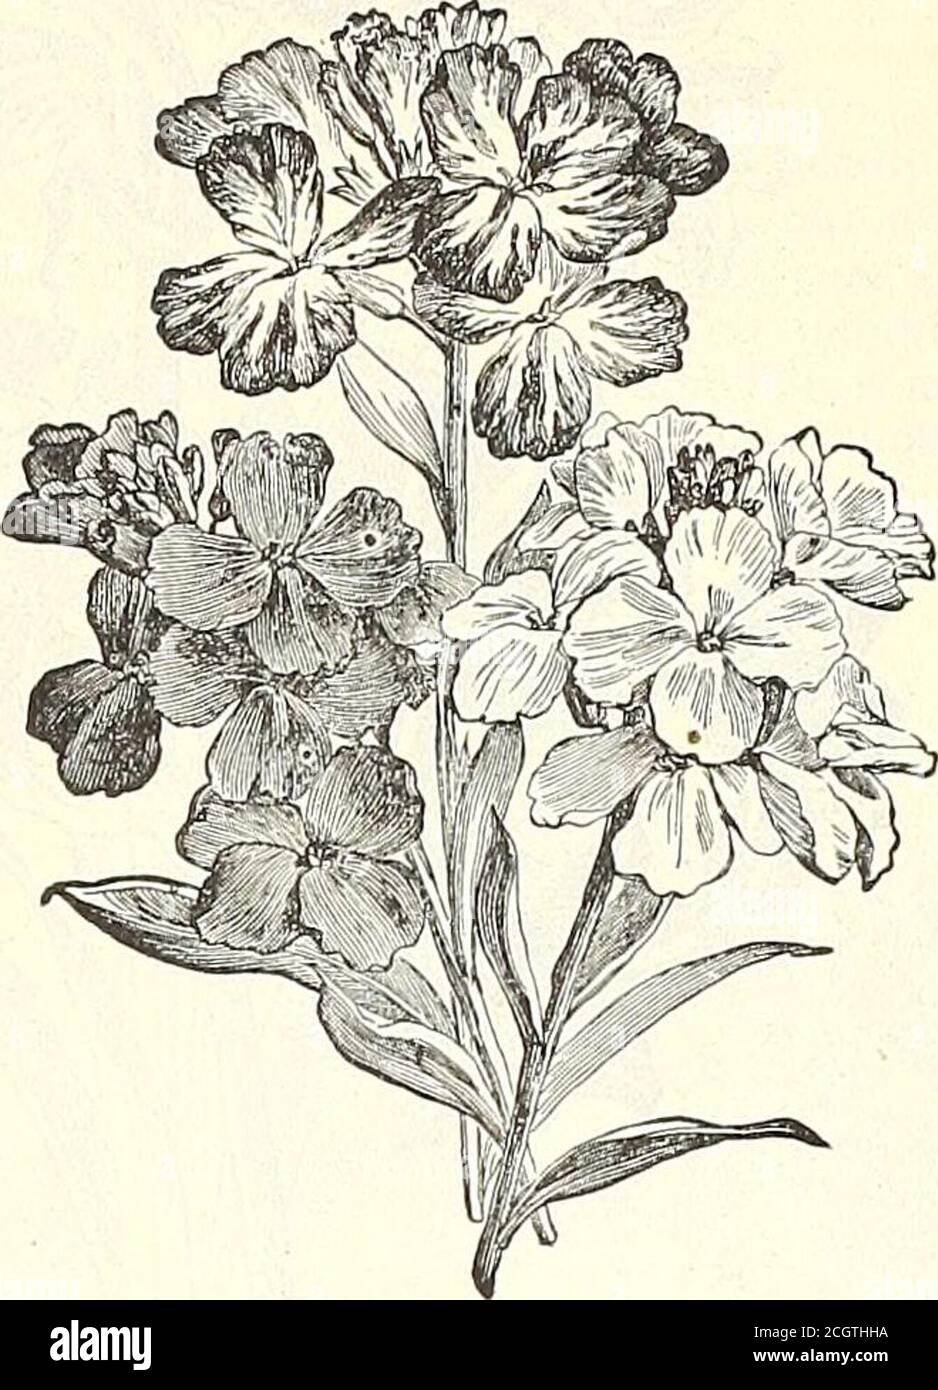 . Dreer's garden 1902 calendar . Single AVallflower. XERANTHEMUM. PER PKT. ViNCA. Zinnia Dwarf Double, (Everlasting.) 4430 Showy double free-flowering border annuals.If the flowers are cut in the bud state theymay be dried and used for winterbouquets; mixed colors 5 ZINNIAS. (Youth and Old Age.)The Double Zinnia is one of themost brilliant and showy of annuals,and has long been a general favorite.The seed can be sown early in the hot-bed and transplanted, or sown later inthe open ground.4445 Double Dwarf White... 5 4443 Orange 5 4444 Scarlet 5 4446 Salmon Rose 5 4441 Canary 5 4442 Jacqueminot. Stock Photo